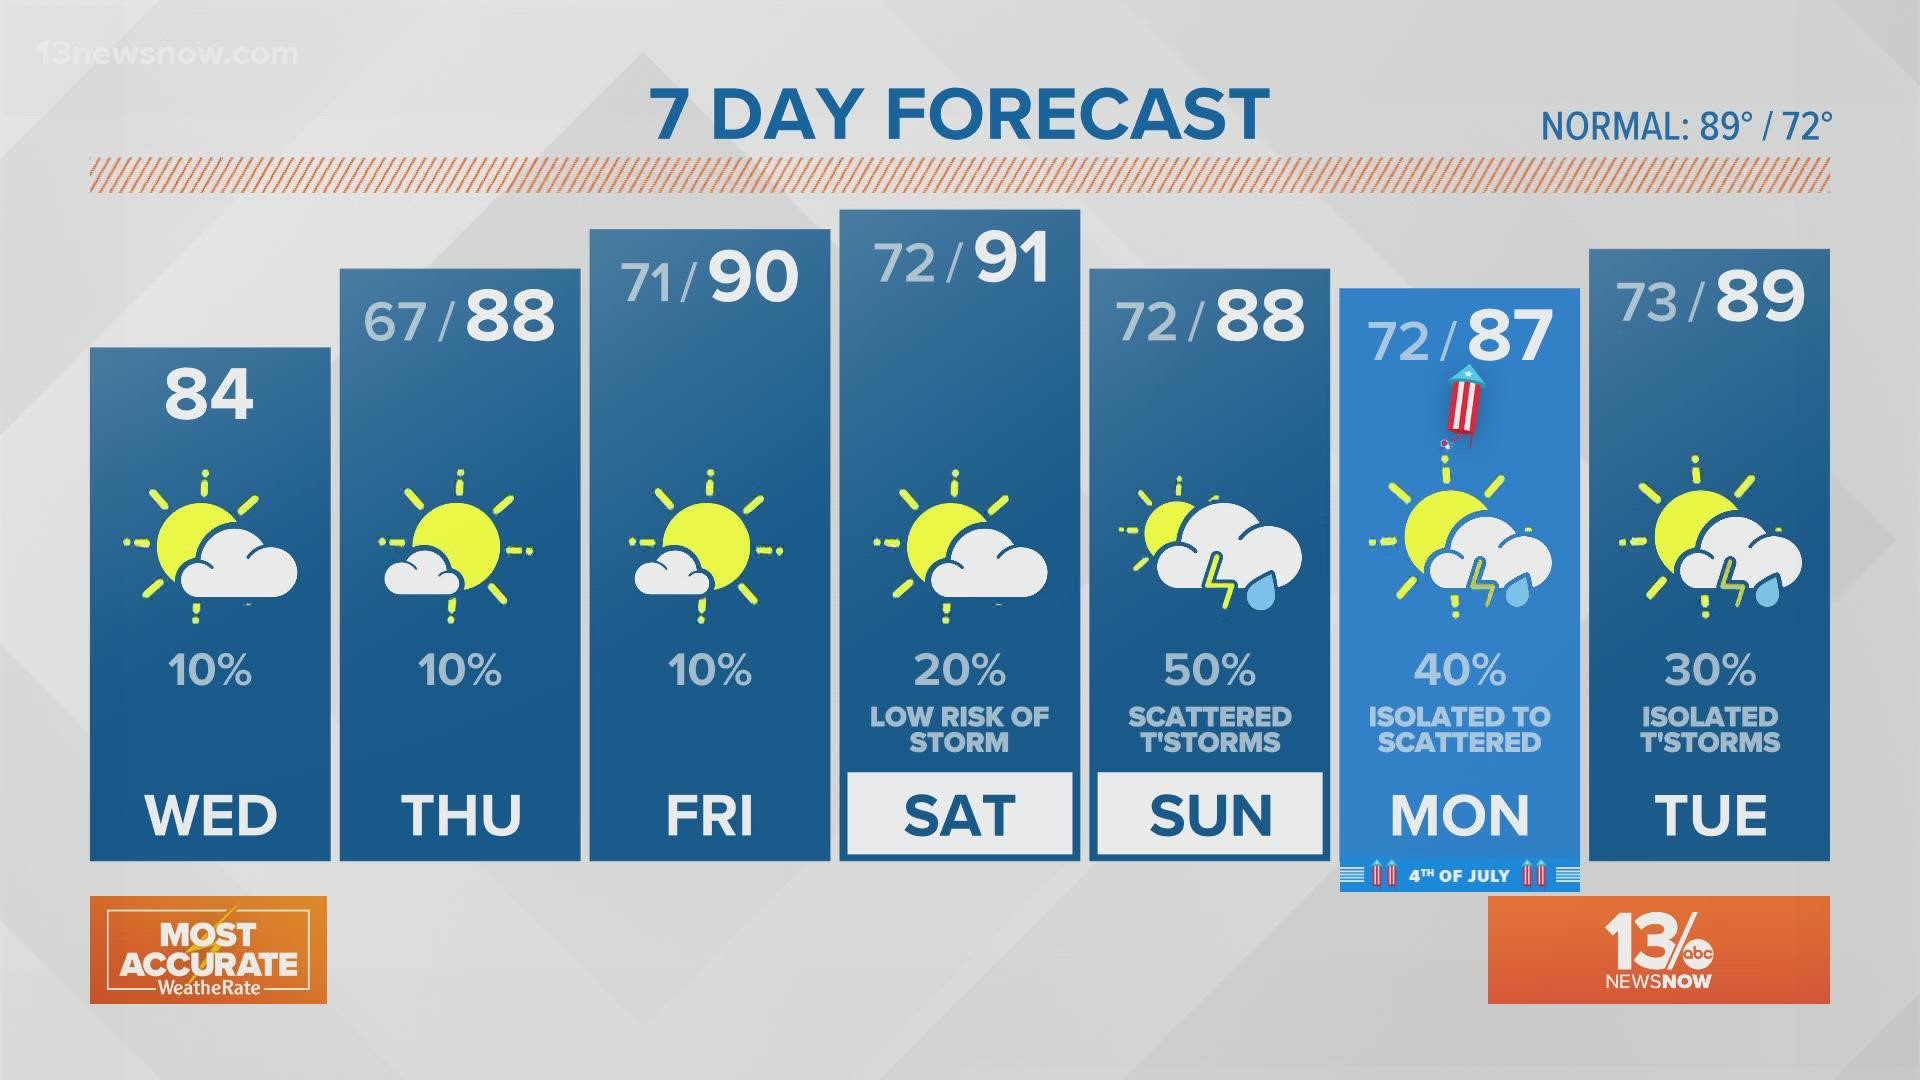 A couple showers may pop up in North Carolina, but the rest of the week in Norfolk is looking warm and dry.